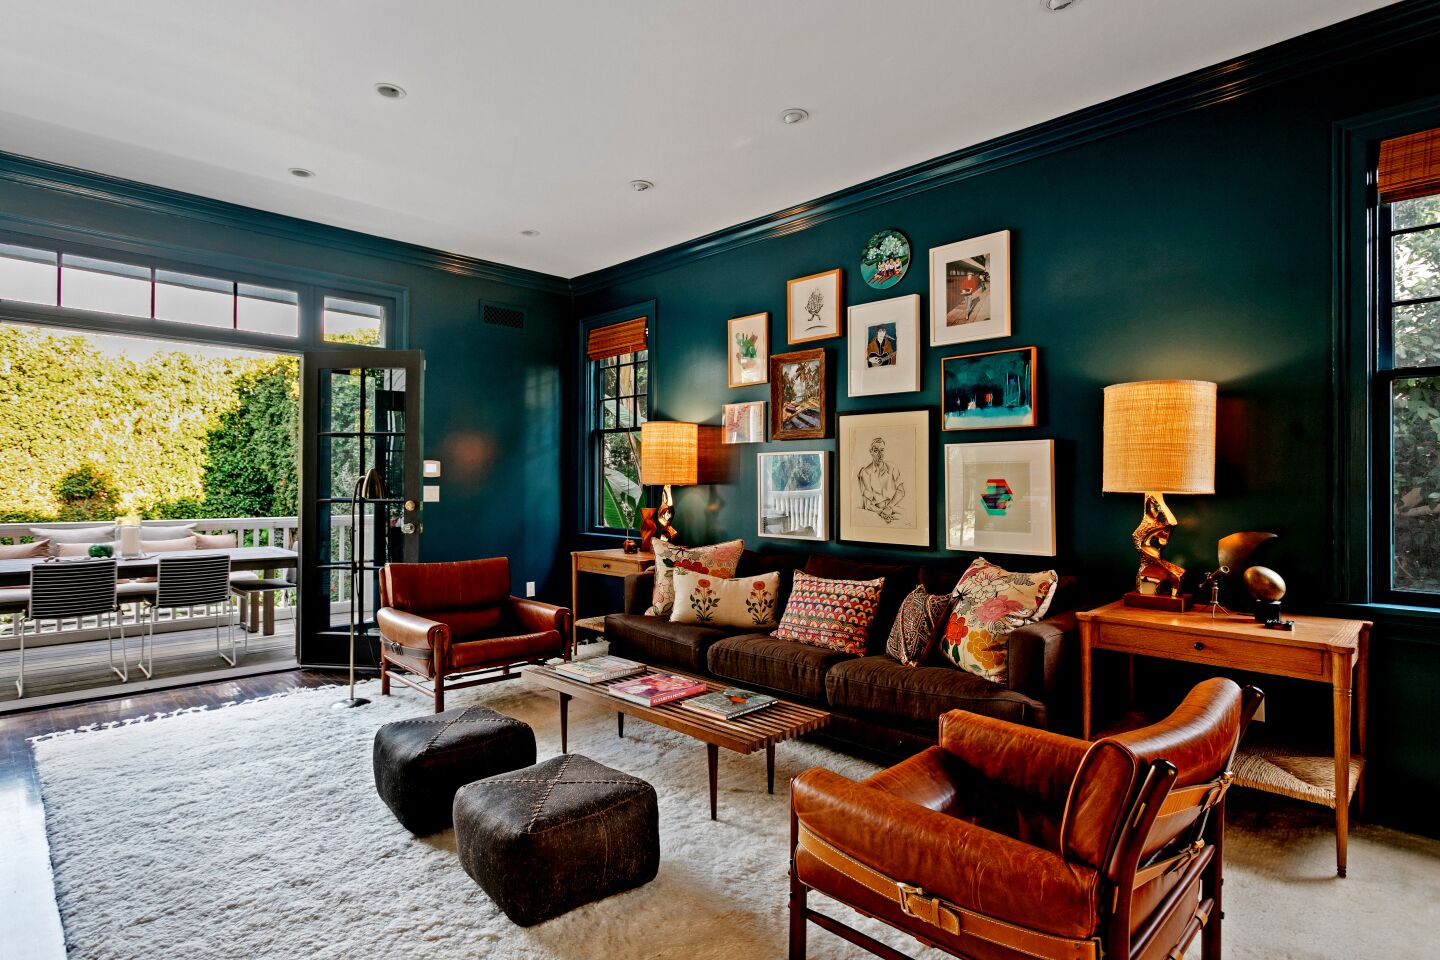 The family room adds a bold splash of turquoise.